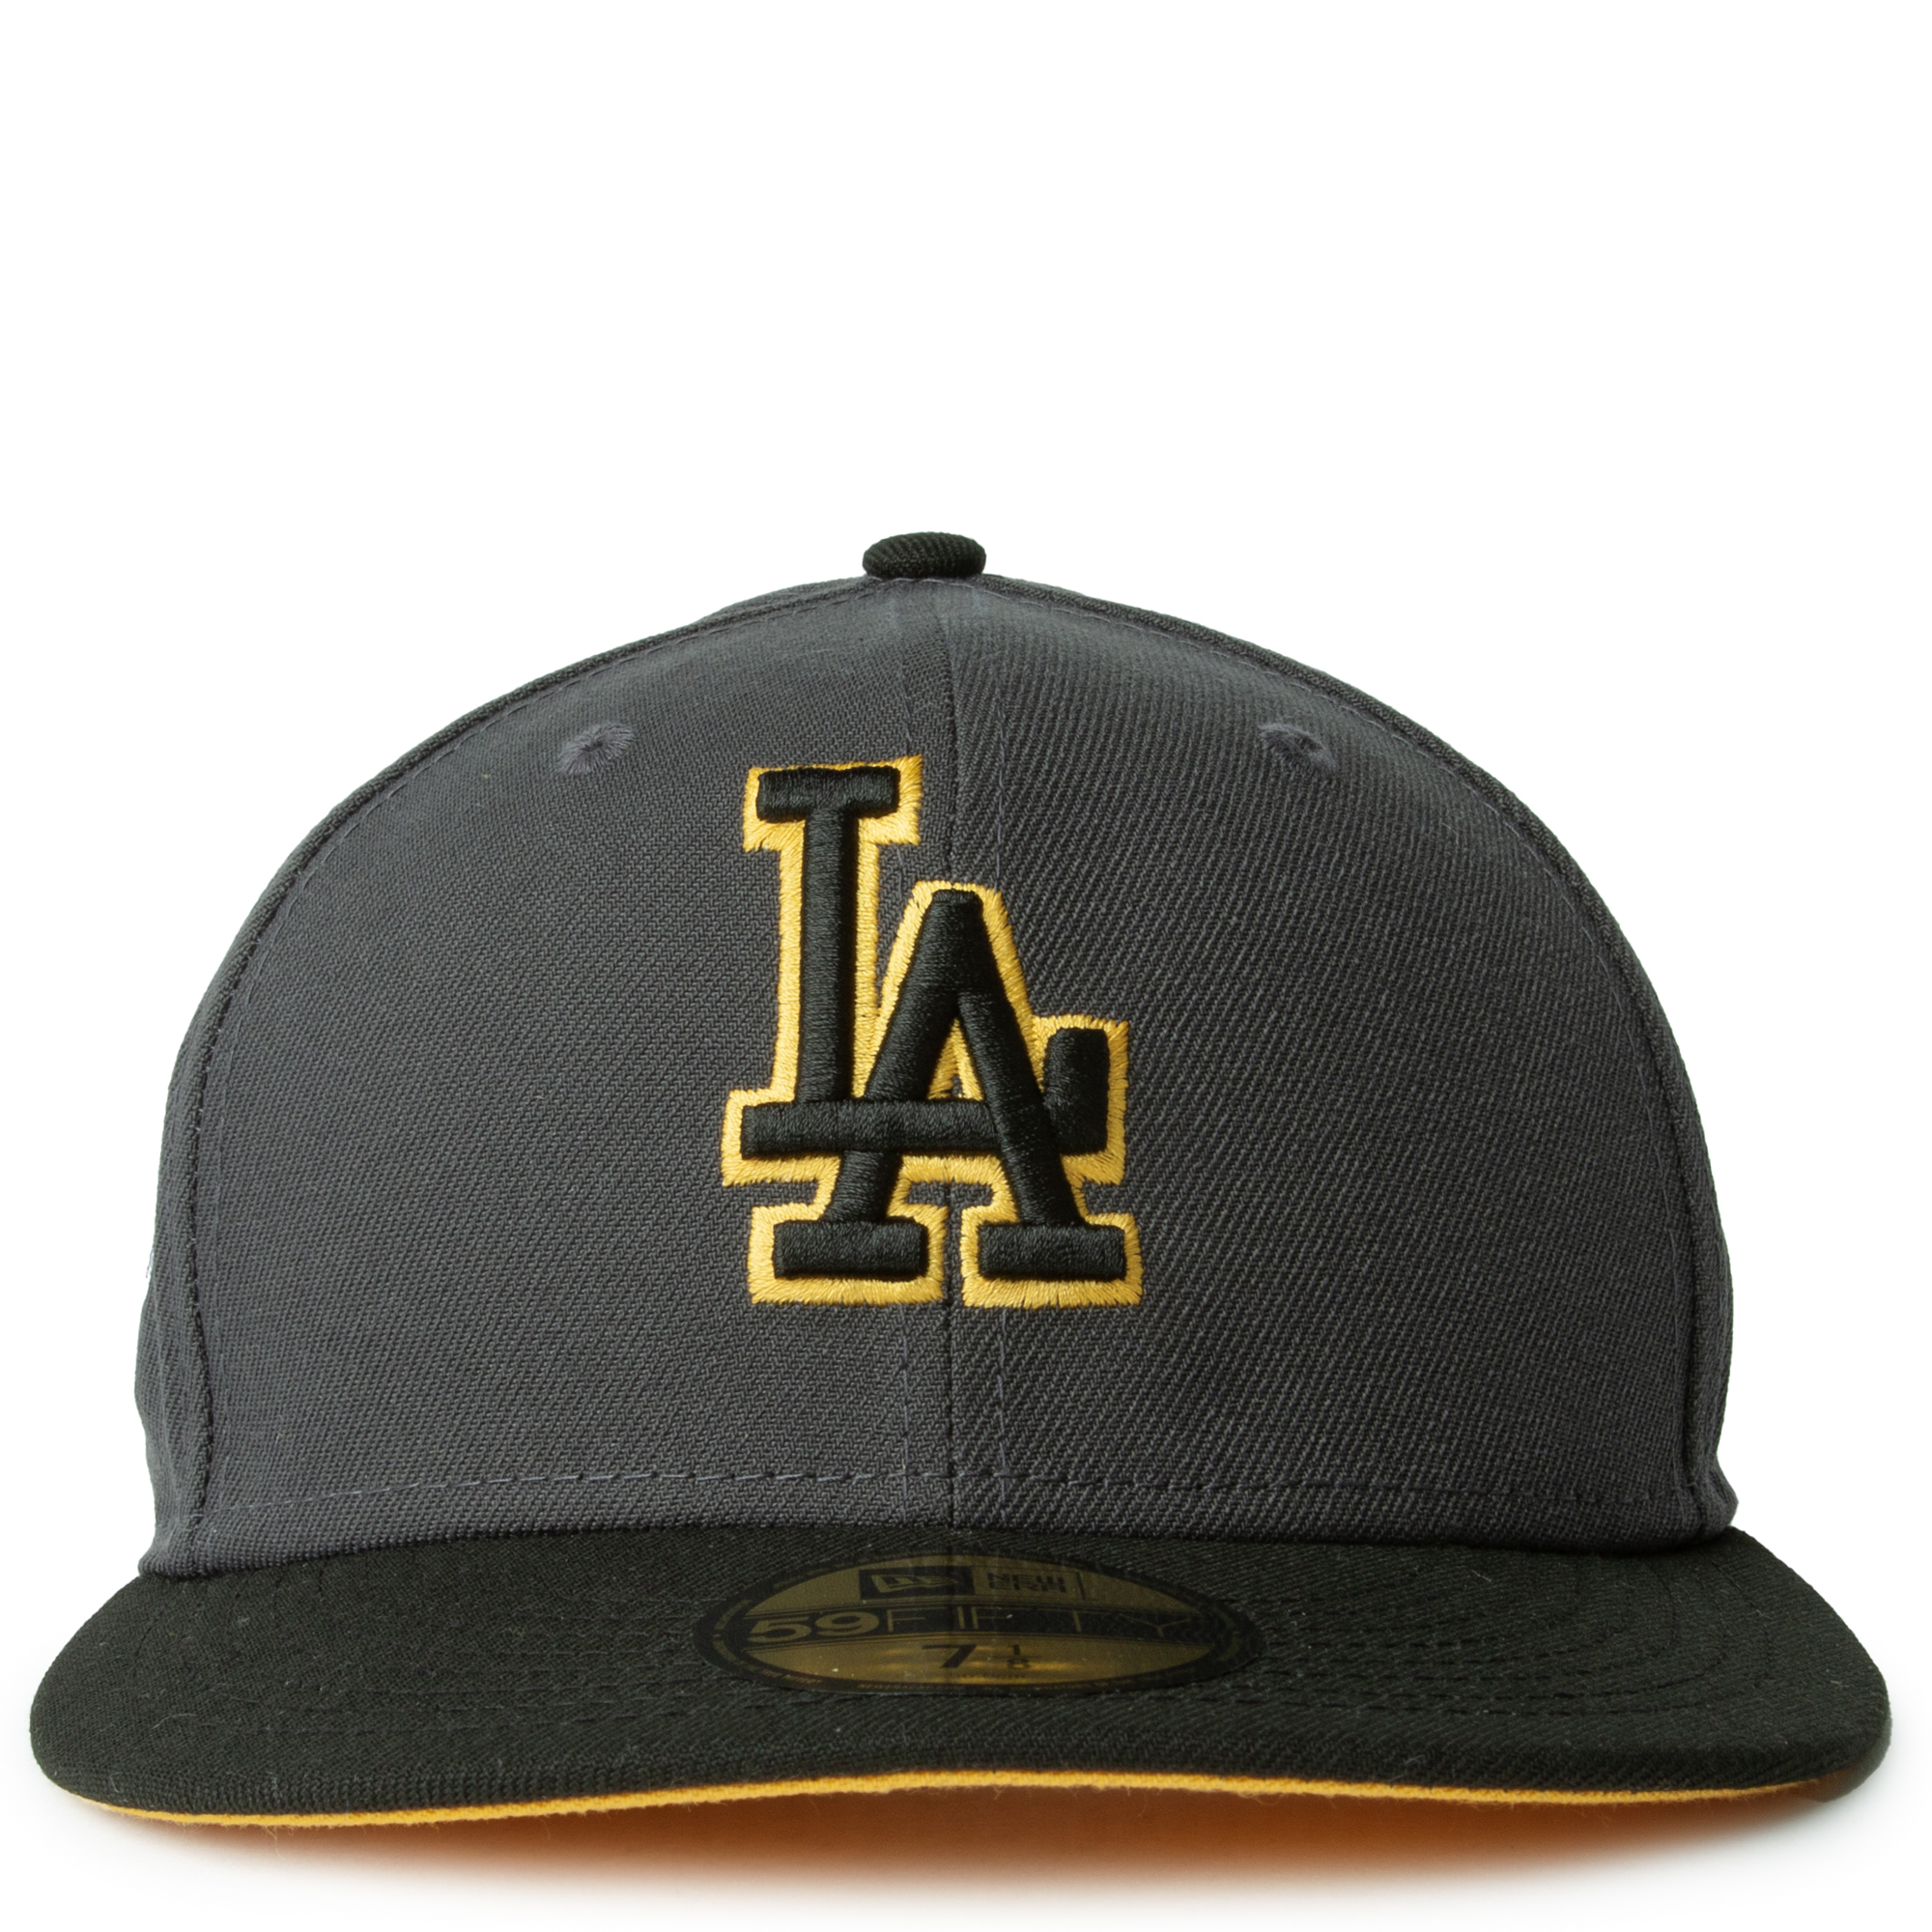 LOS ANGELES DODGERS BLACK GRAY 59FIFTY FITTED HAT 70740297